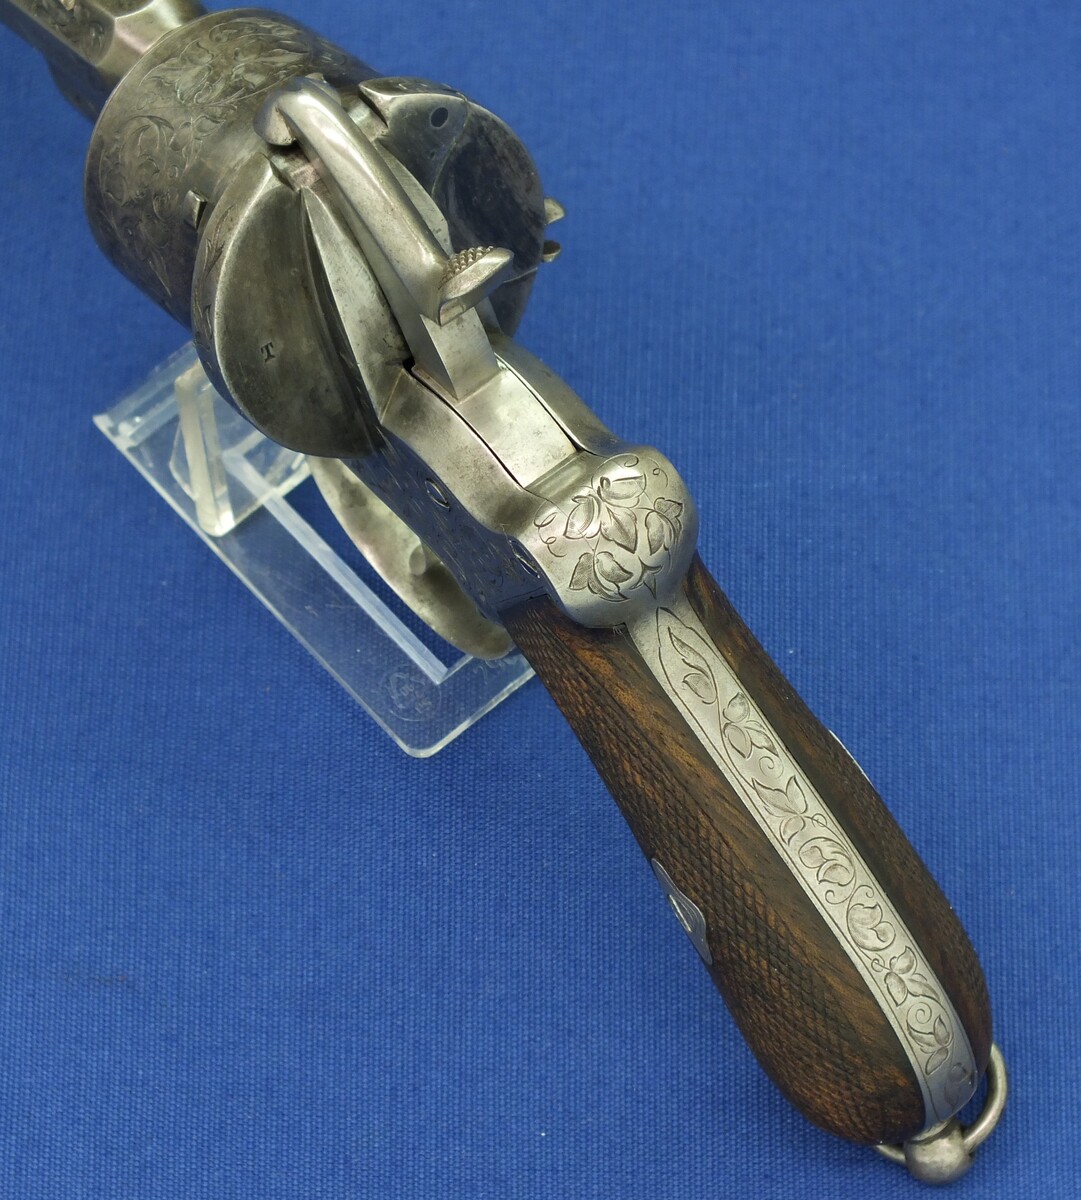 A fine Antique Belgian cased engraved Lefaucheux patent 6 shot 12 mm Pinfire Revolver by Auguste Francotte. escutcheon on lid signed: Robert Conway Swatow (Shantou) China 1867. In very good condition. Price 2.950 euro